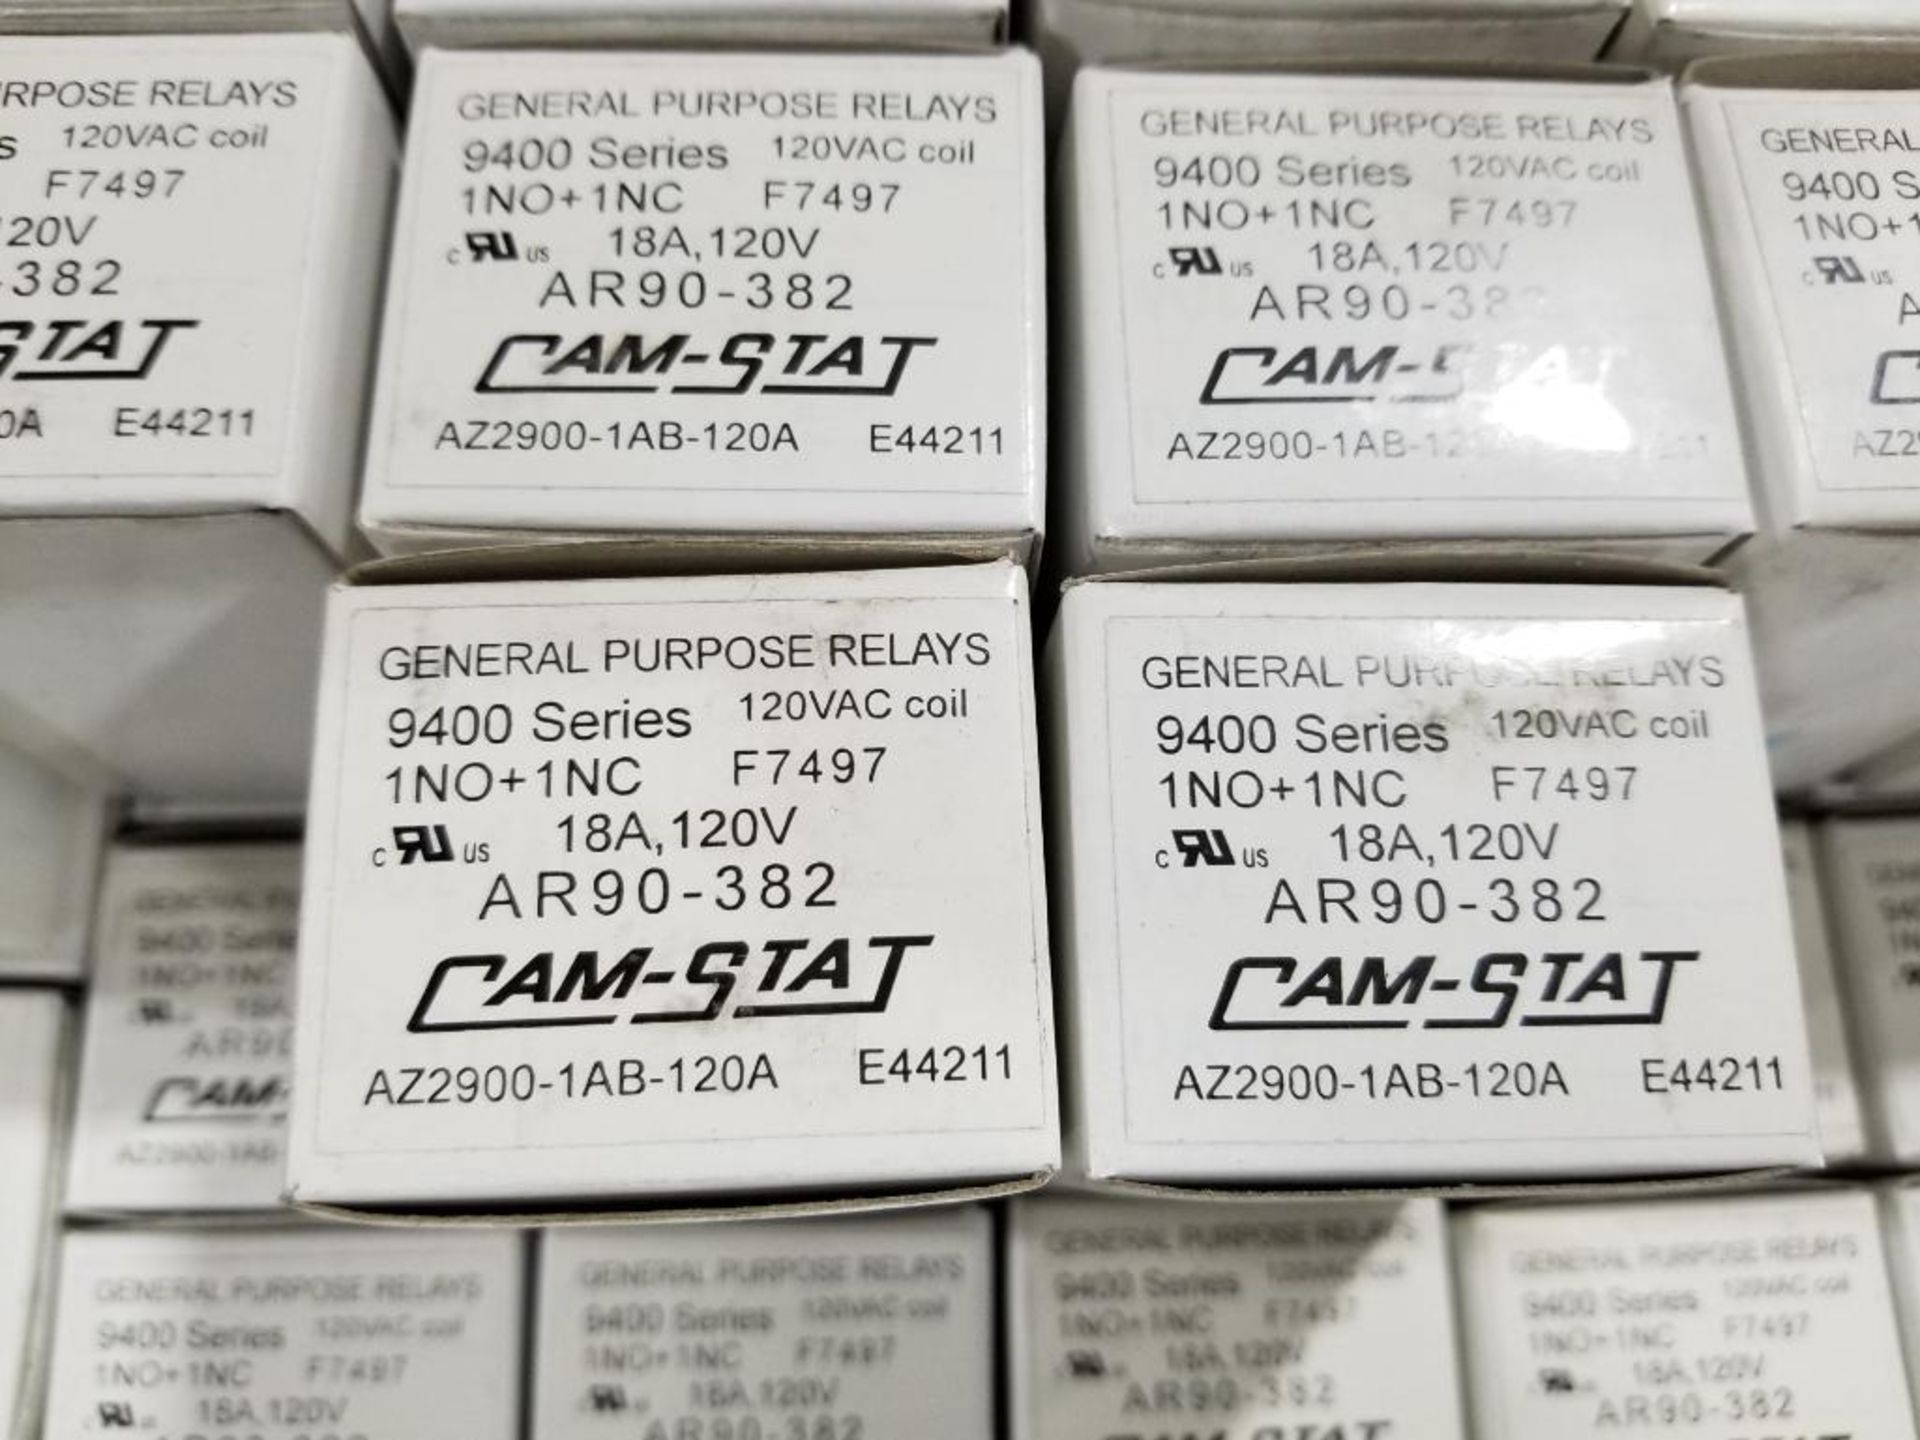 Qty 50 - Cam-stat general purpose relay. Part number AZ2900-1AB-120A. - Image 3 of 7